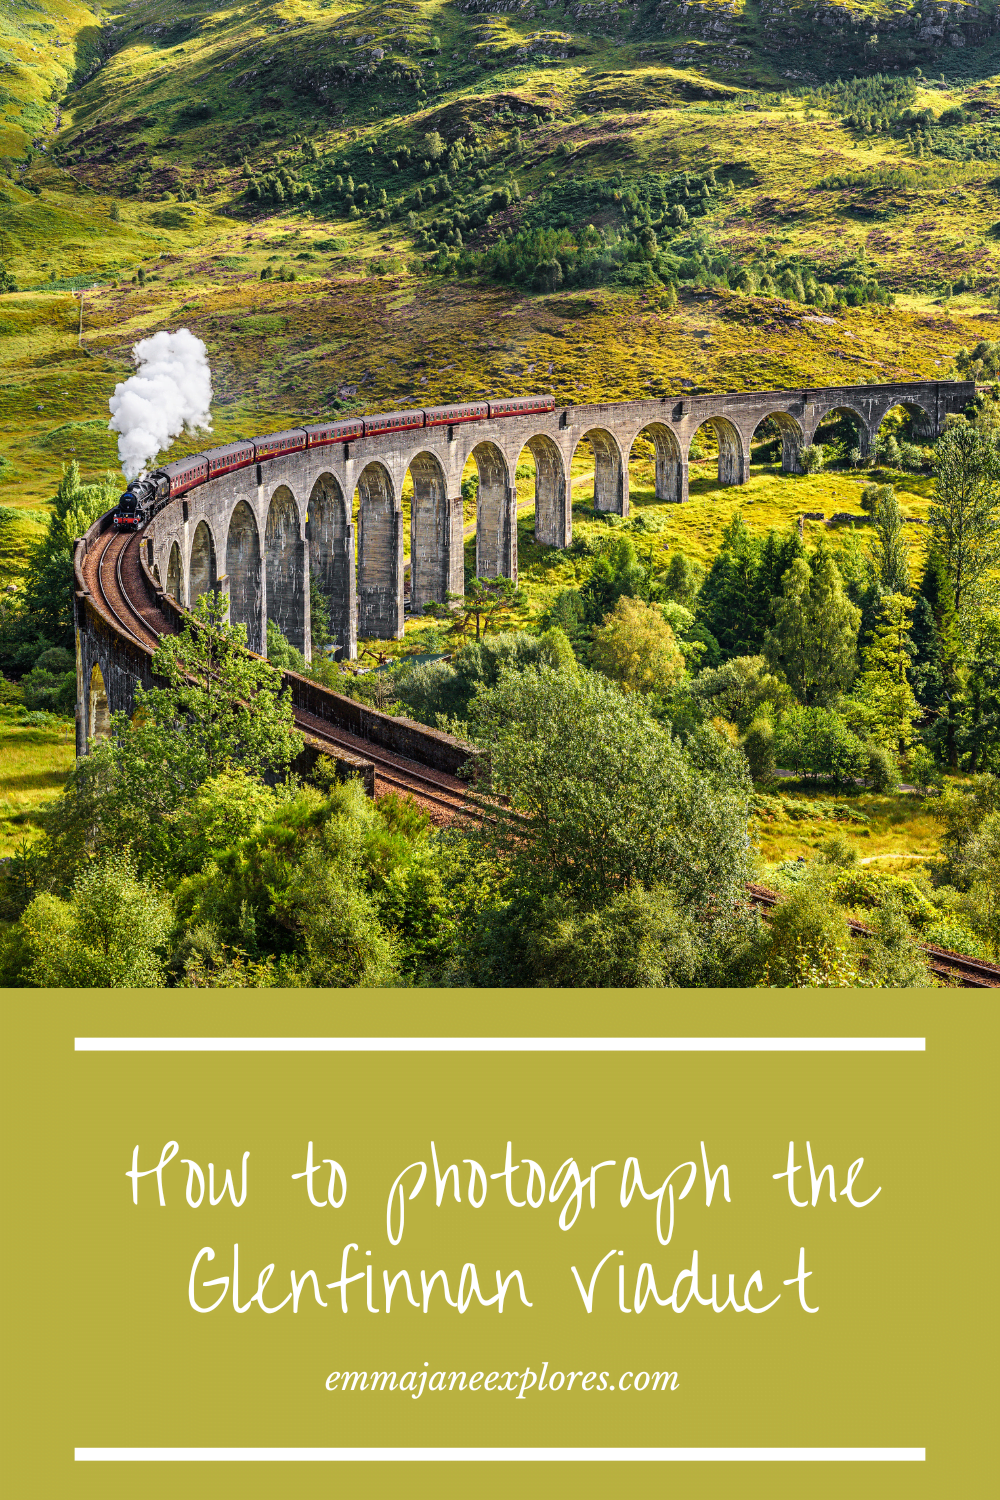 How to photograph the Glenfinnan Viaduct - Emma Jane Explores